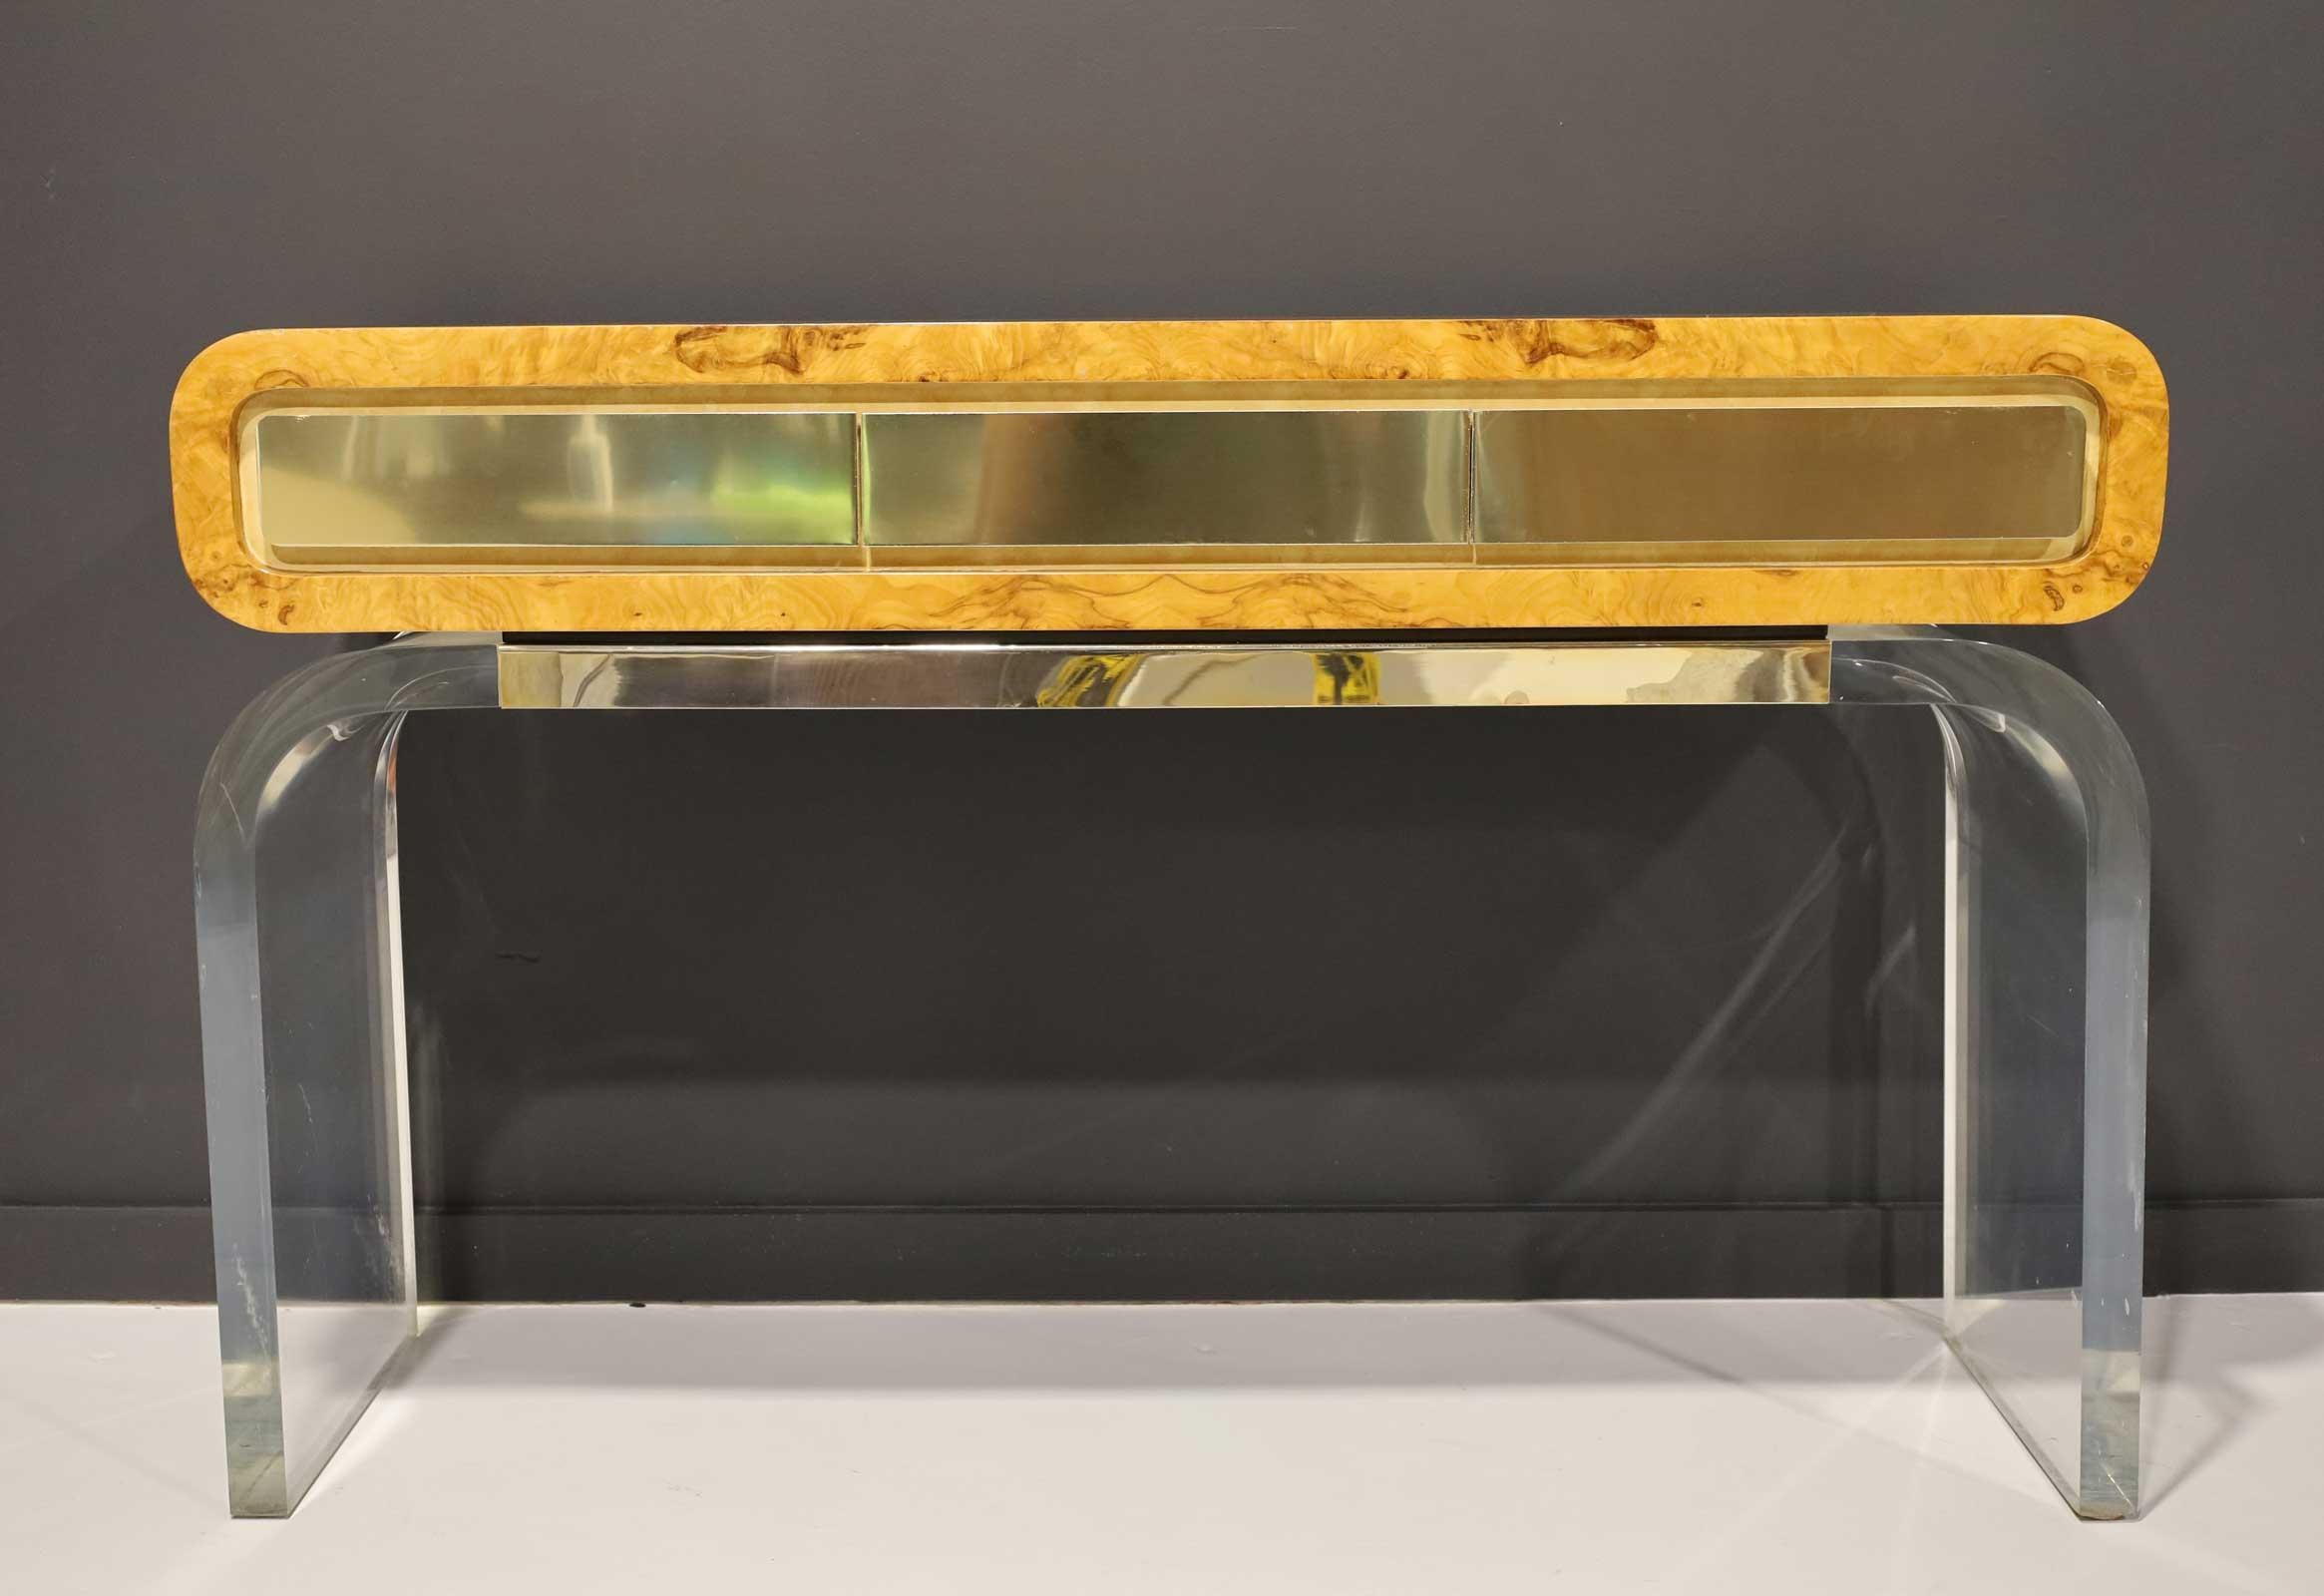 Very unique console designed by and manufactured by Vladimir Kagan. Console rests on a thick lucite base with curved sides. Console is bent burlwood with three drawers faced in brushed brass. Bears Kagan label inside drawer.